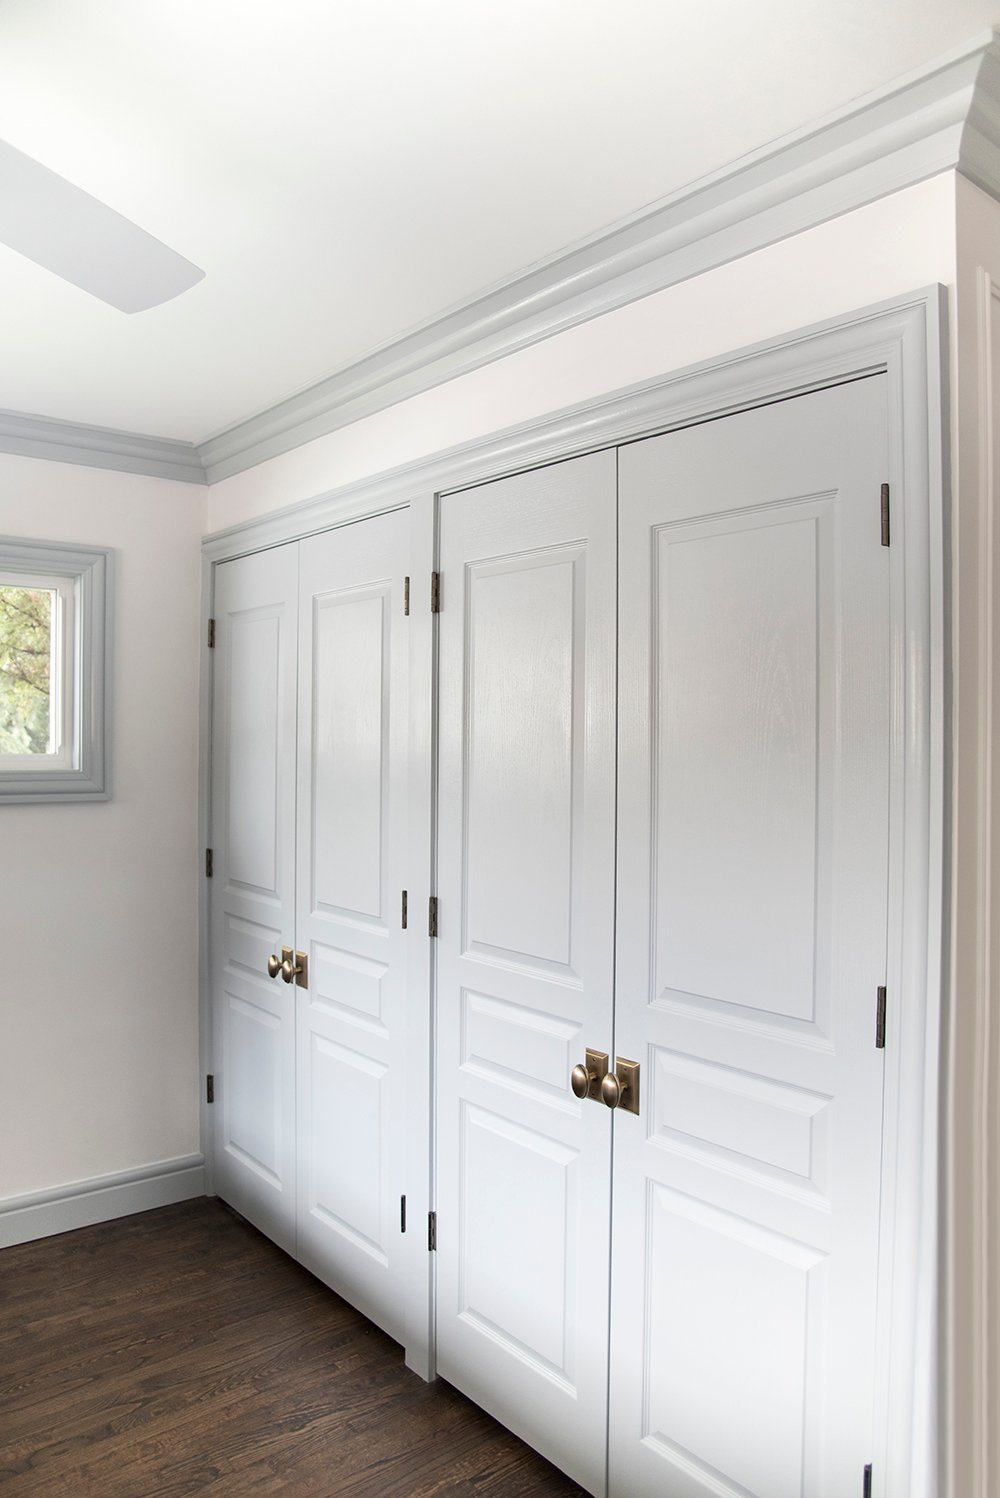 My Thoughts On Moulding & Millwork - roomfortuesday.com